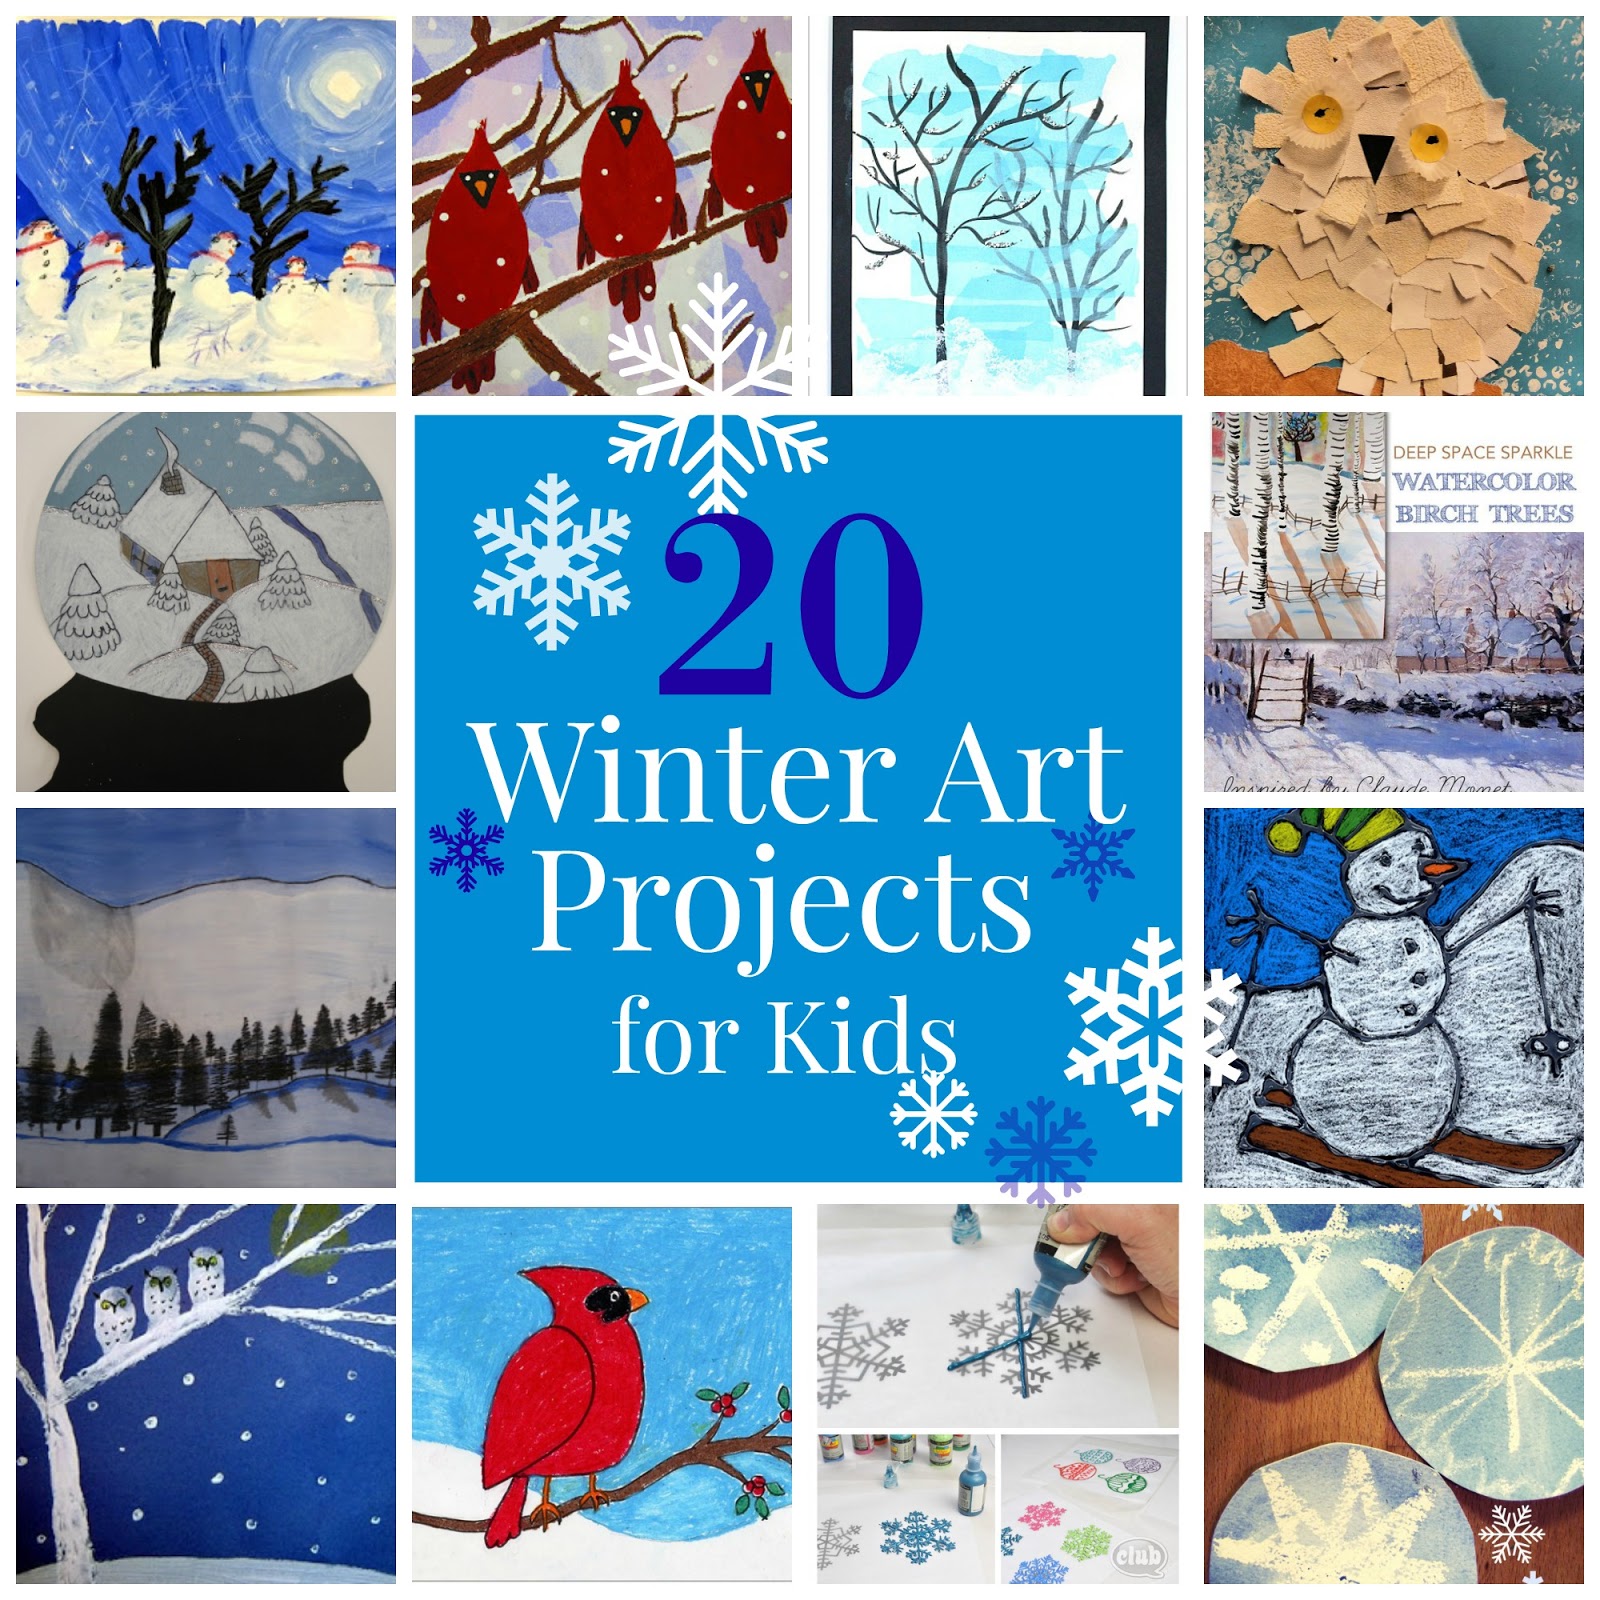 The Unlikely Homeschool: 20 Winter Art Projects for Kids